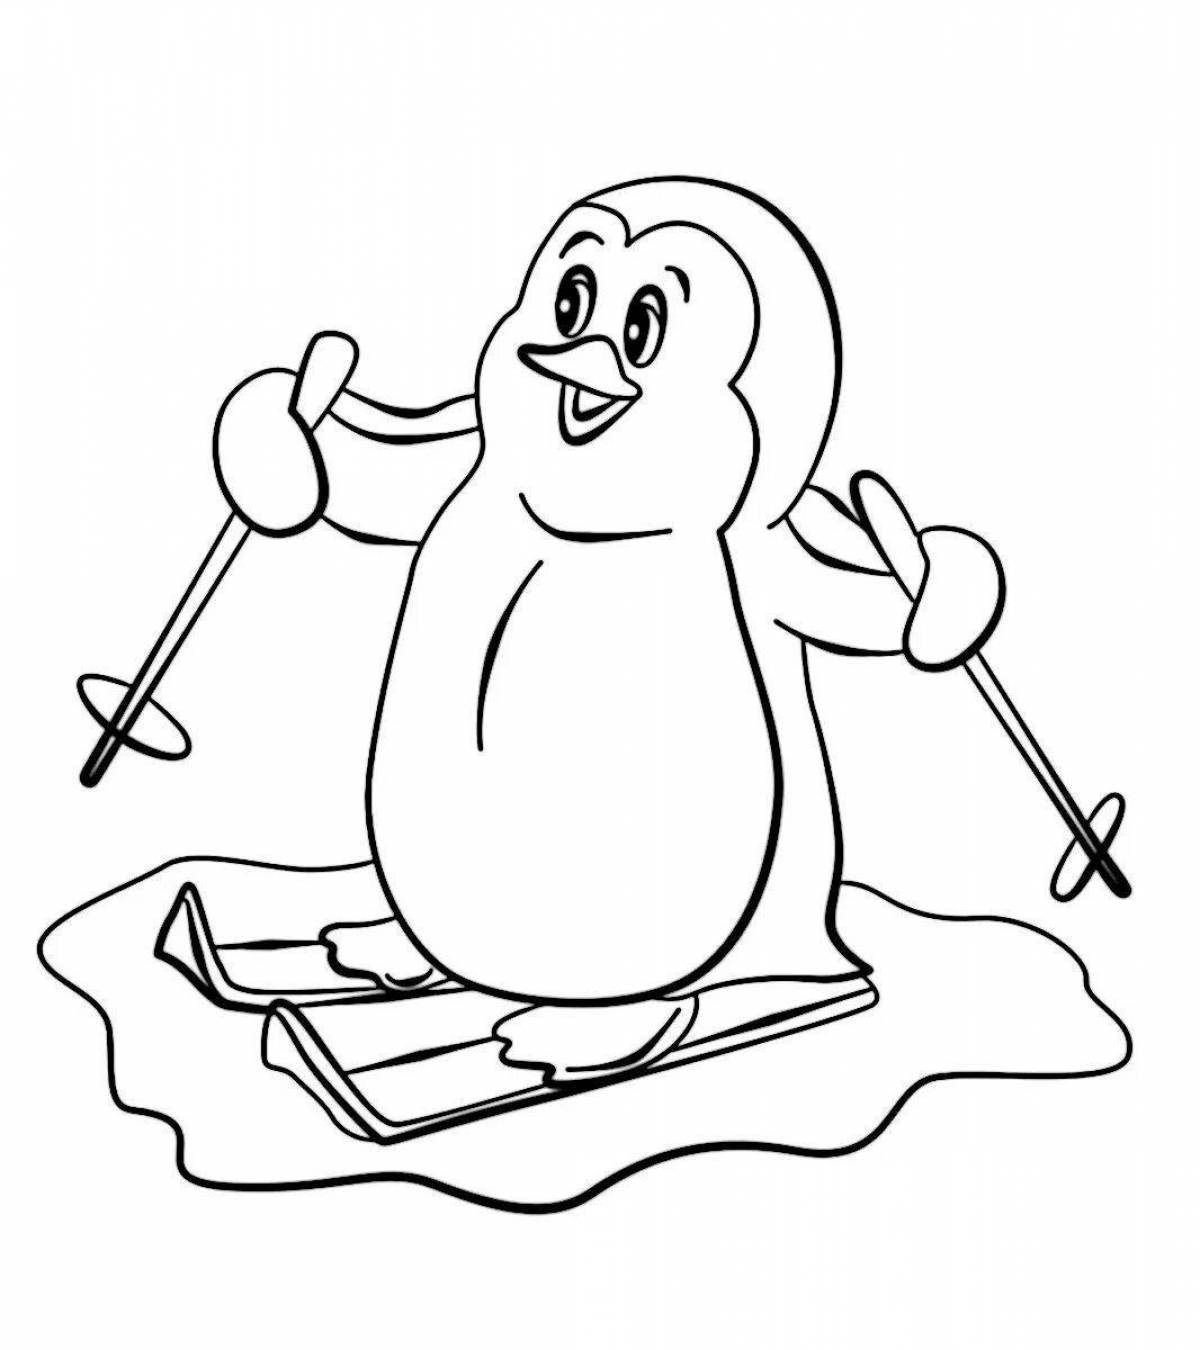 Coloring page happy penguin on an ice floe for kids